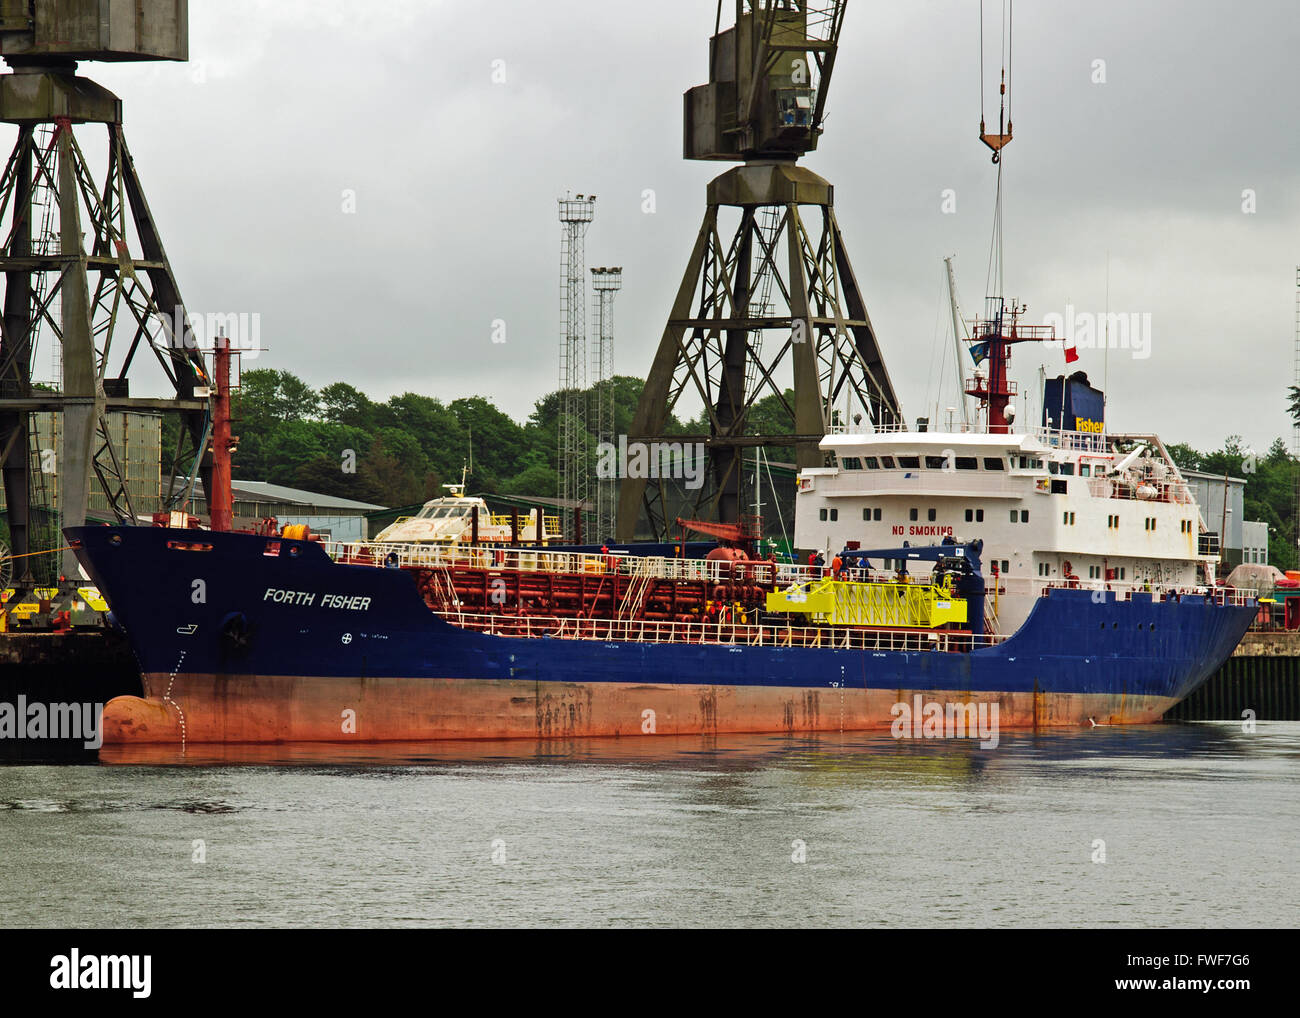 Crude oil tanker Forth Fisher moored at Rushbrooke Docks, County Cork, Ireland Stock Photo